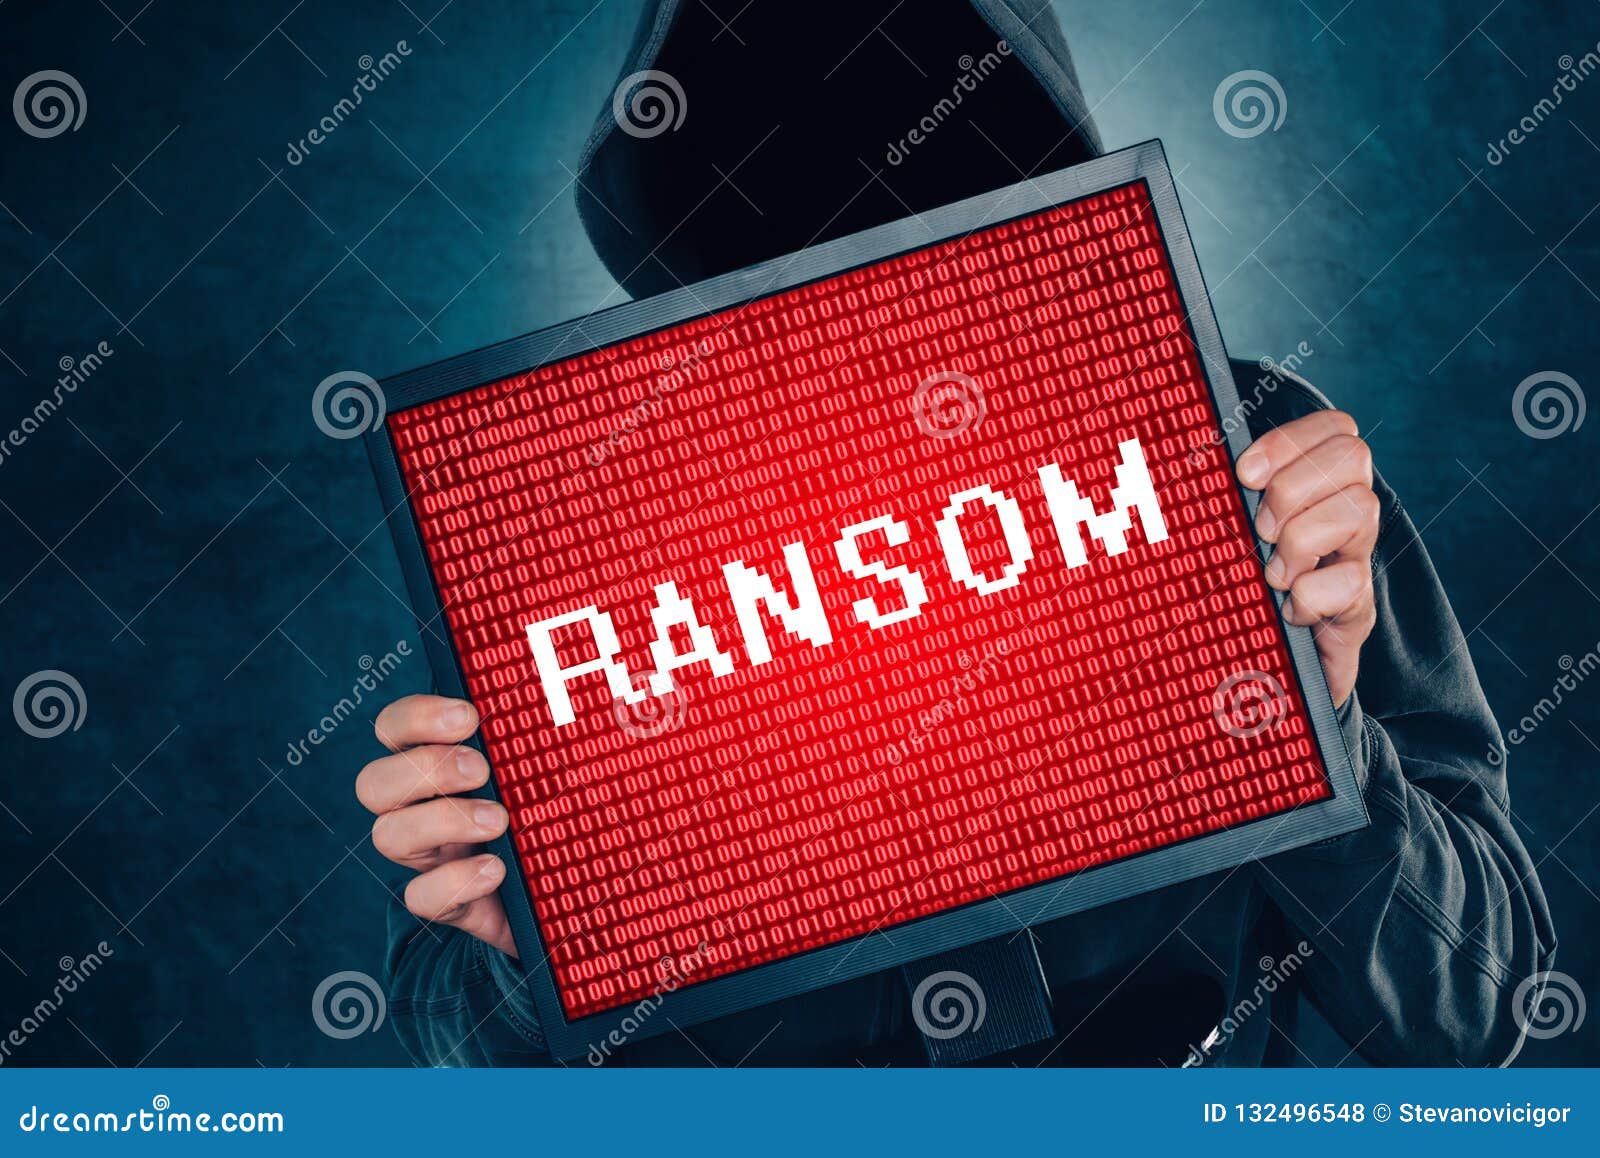 ransomware computer virus concept, hacker with monitor